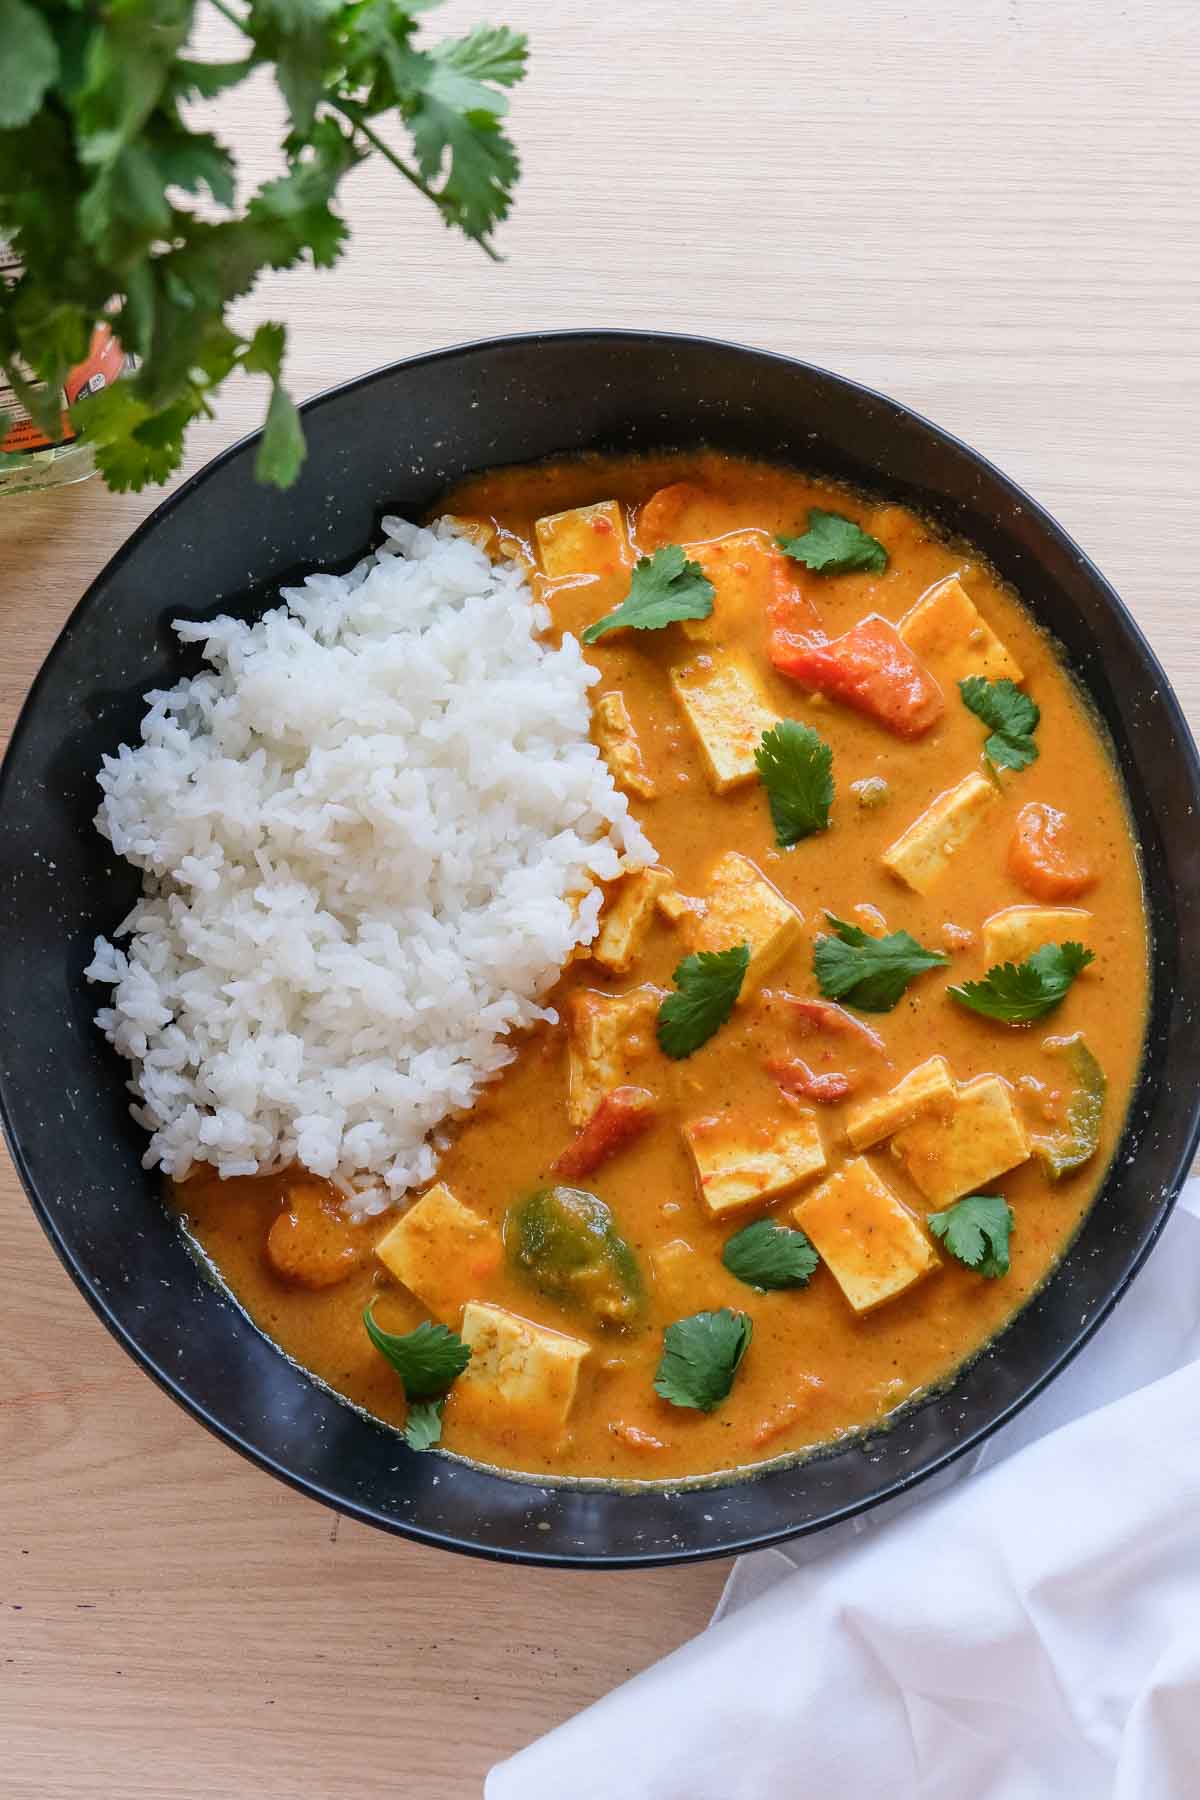 A plate of vegan butter chicken made from tofu, garnished with cilantro, with rice on the side.